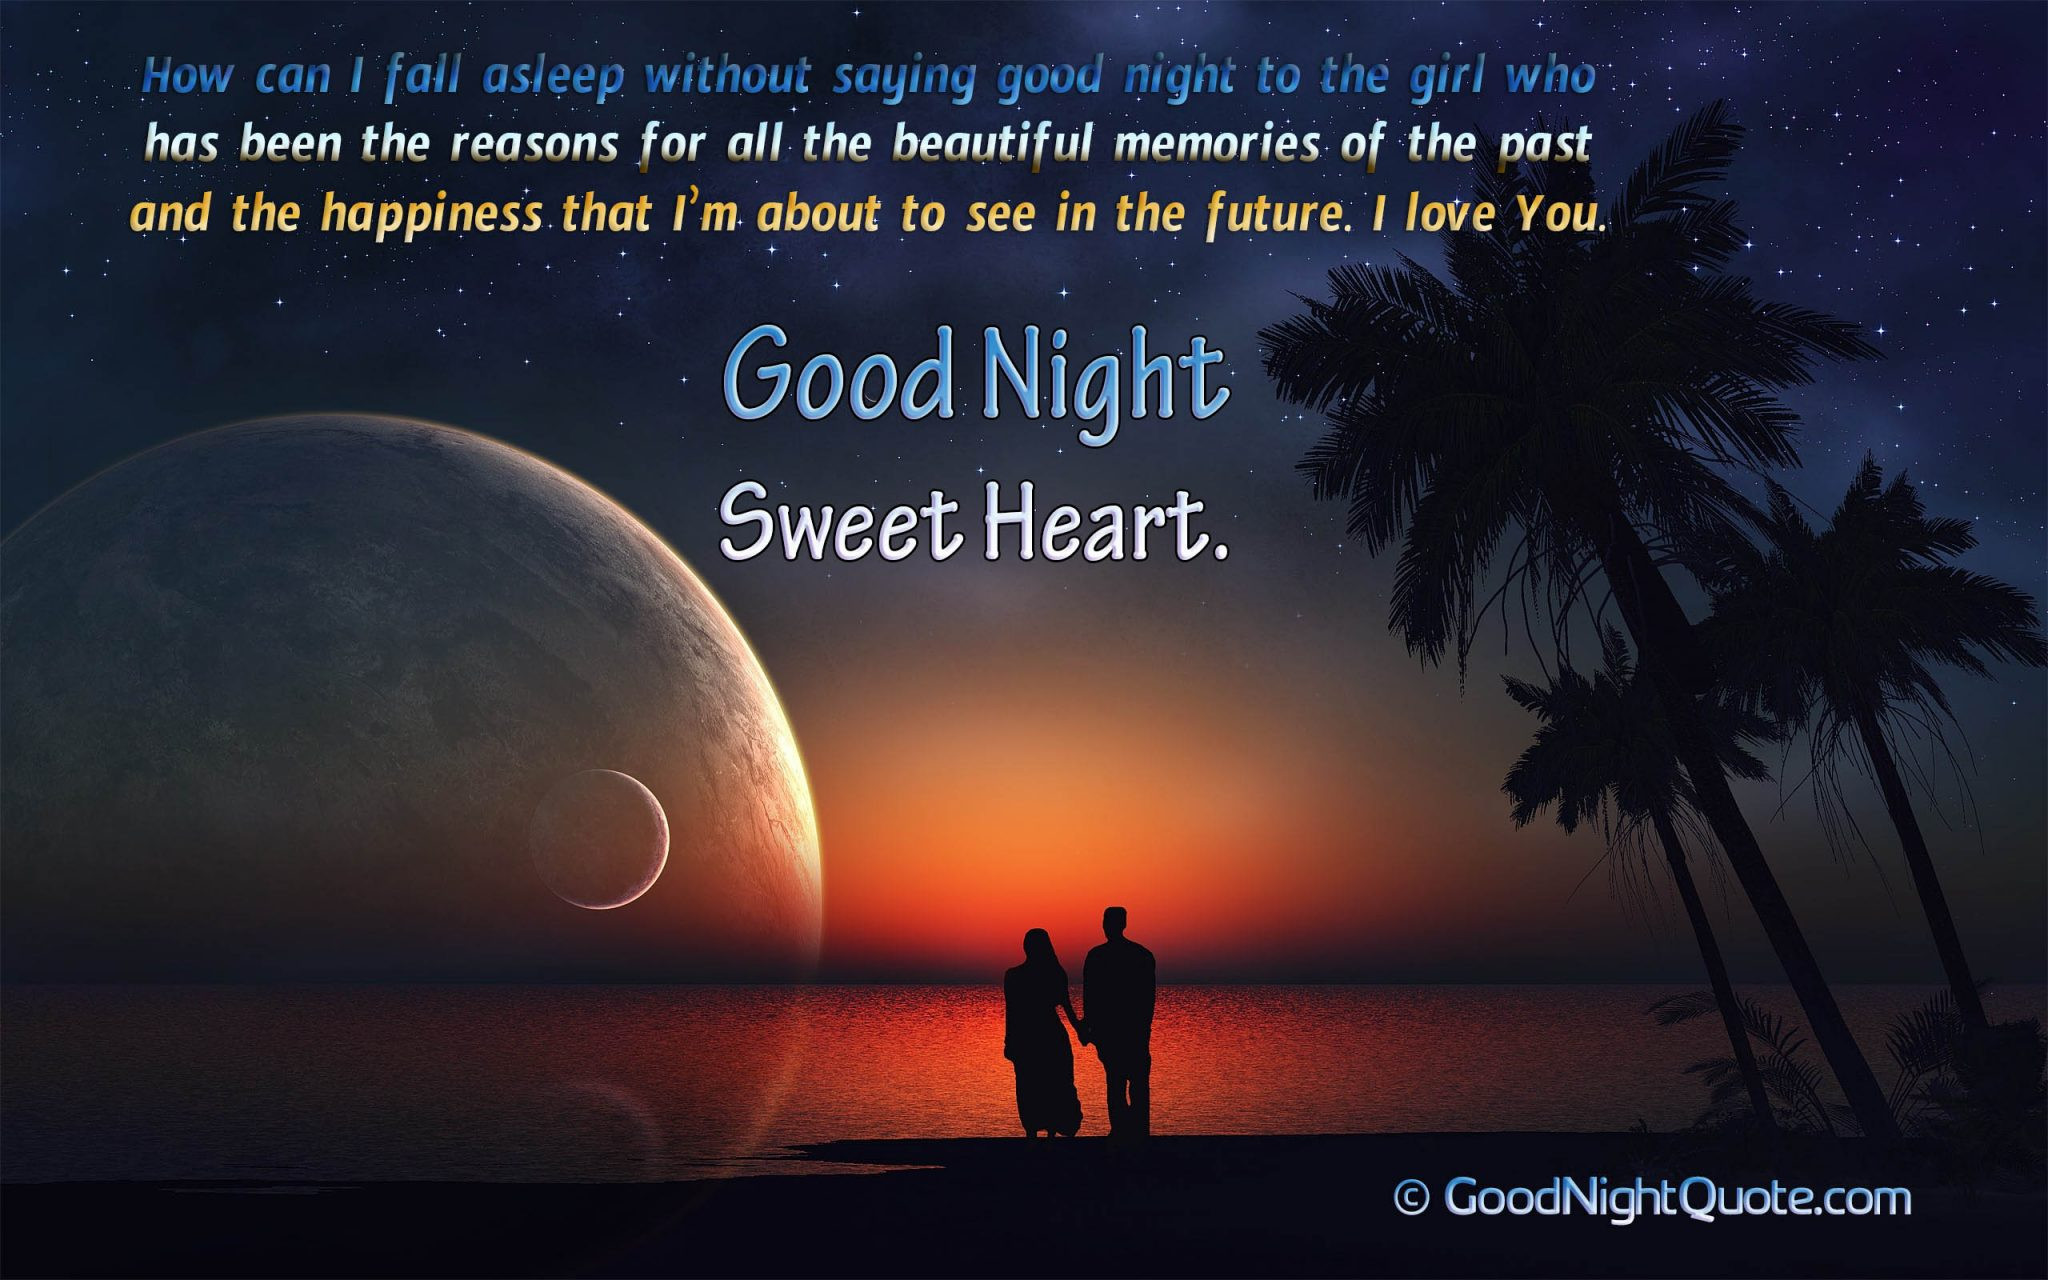 Goodnight Love Quotes
 50 Cute & Romantic Good Night Messages for Her Good